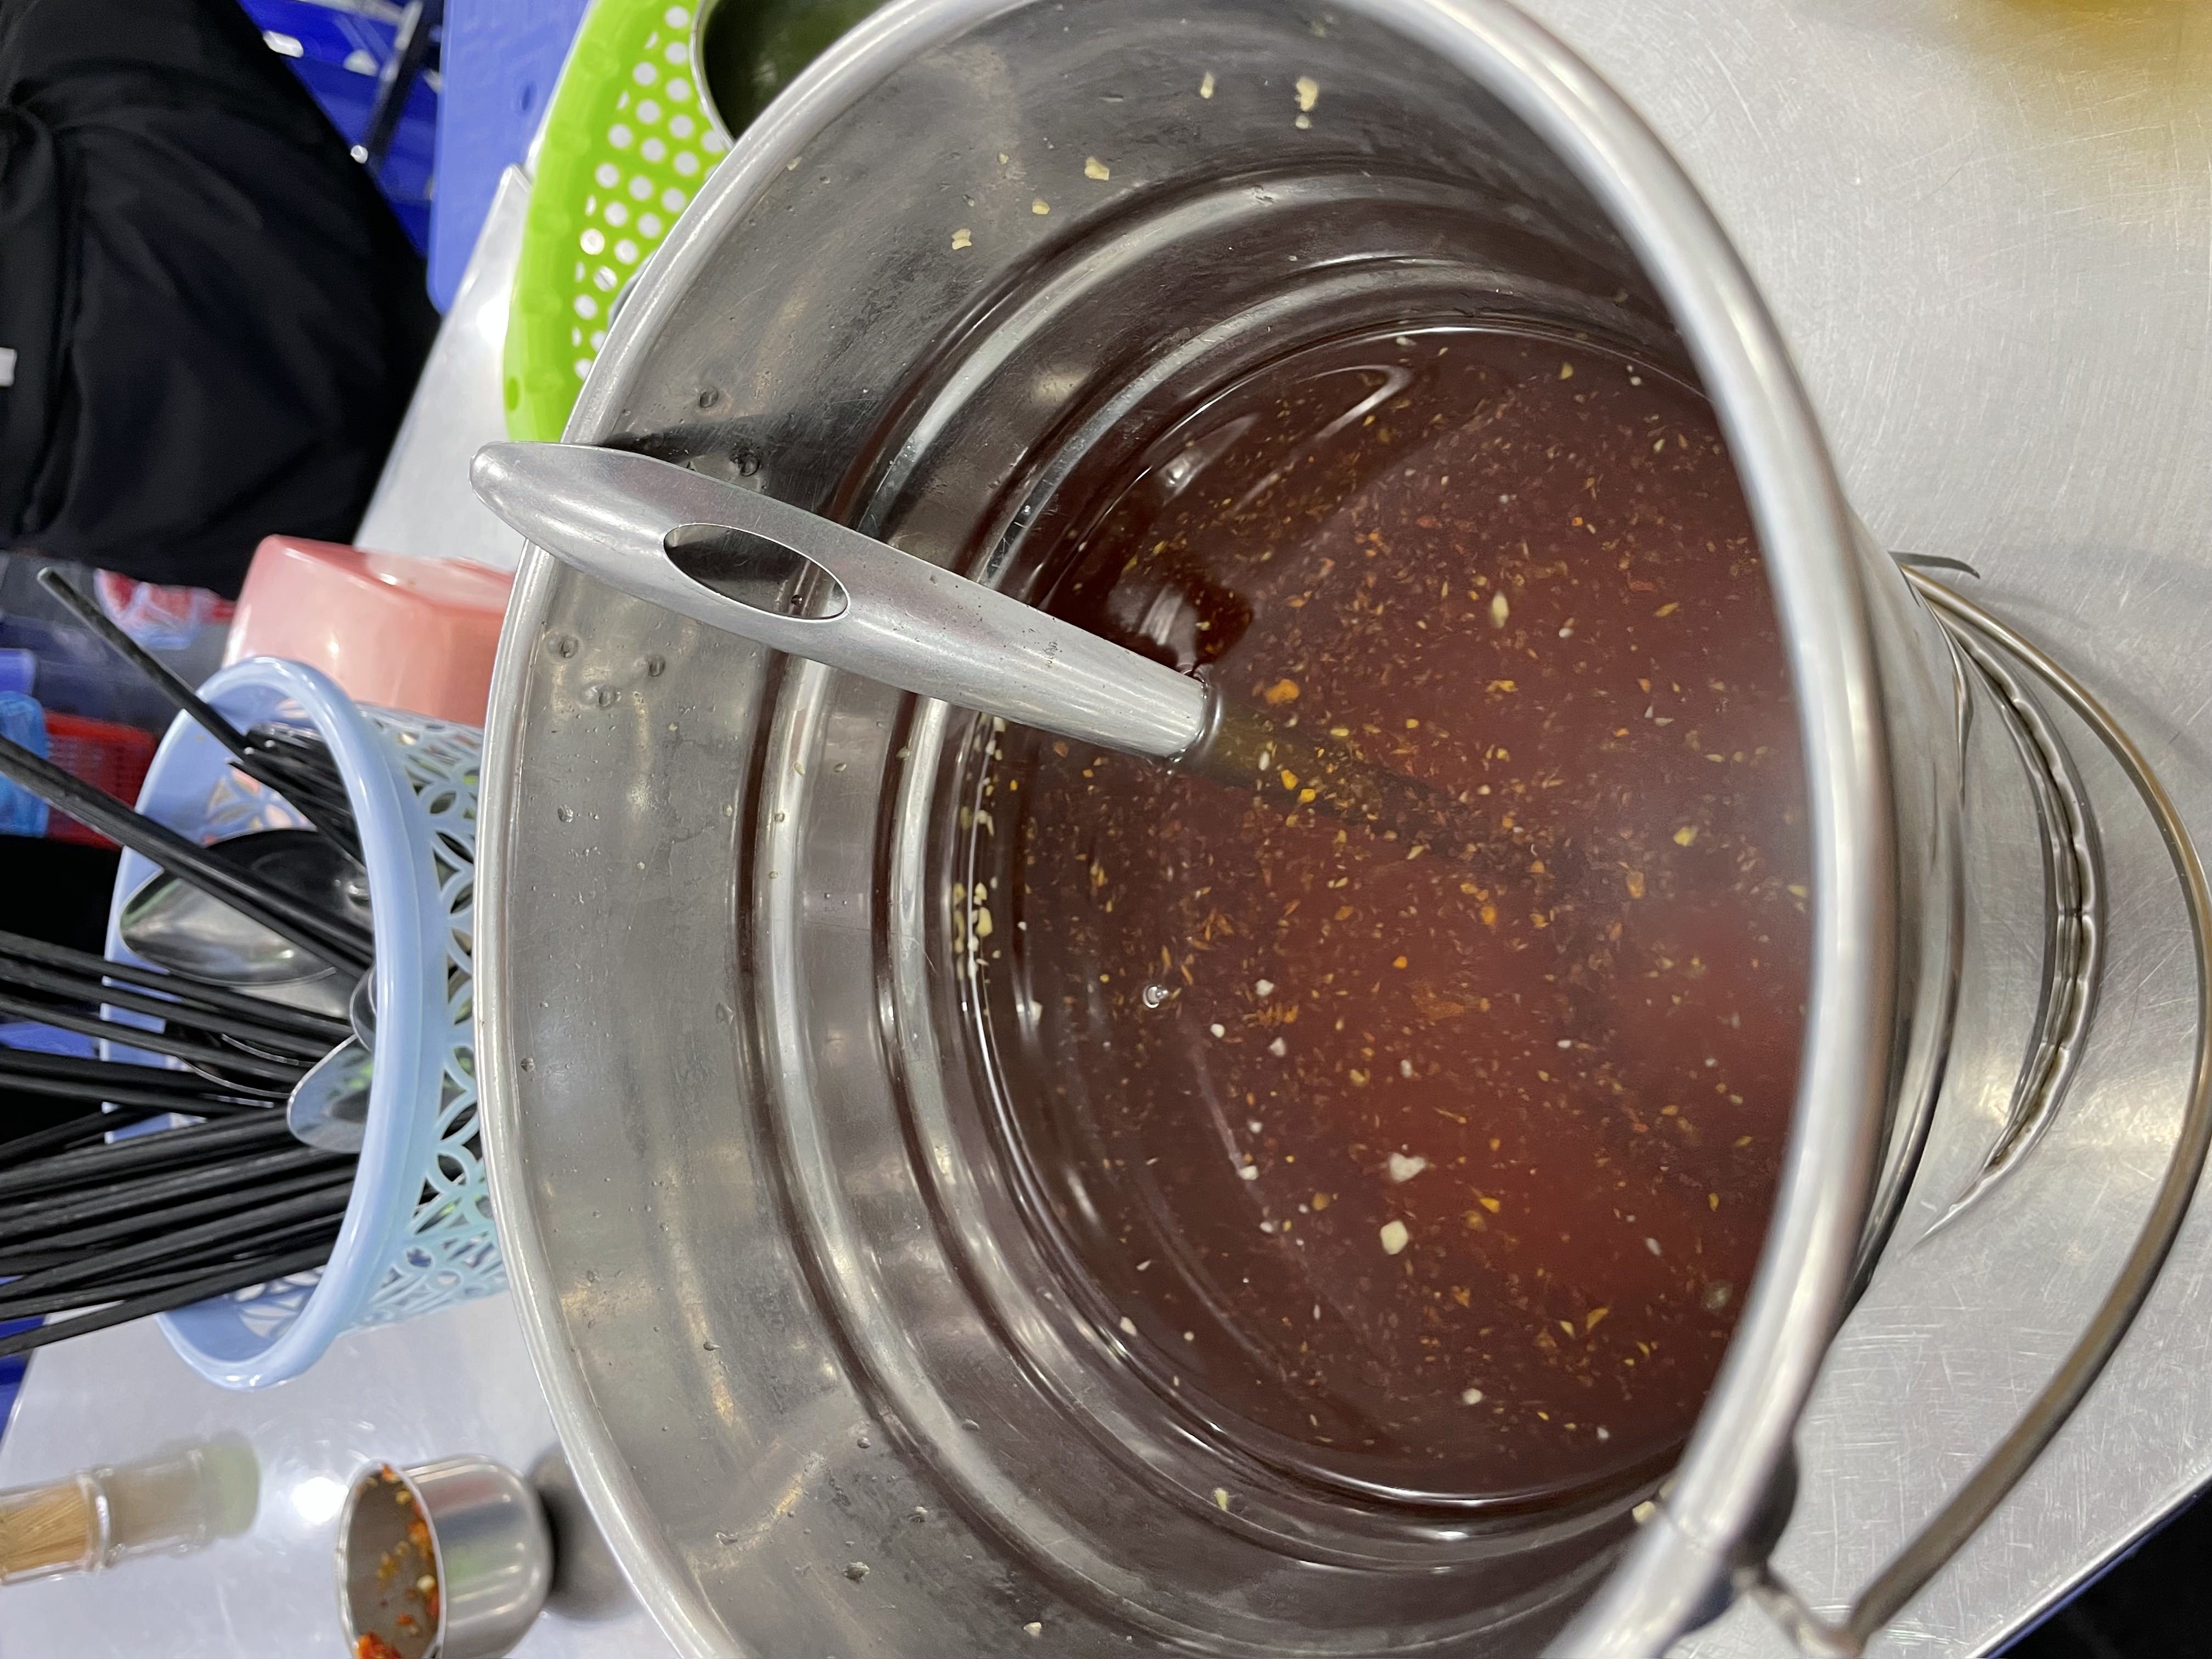 A bucket of sweet and sour fish sauce seen at Kieu Bao, a 'bún thịt nướng' restaurant with six branches across Ho Chi Minh City. Photo: Cassanda Cassidy / Tuoi Tre News